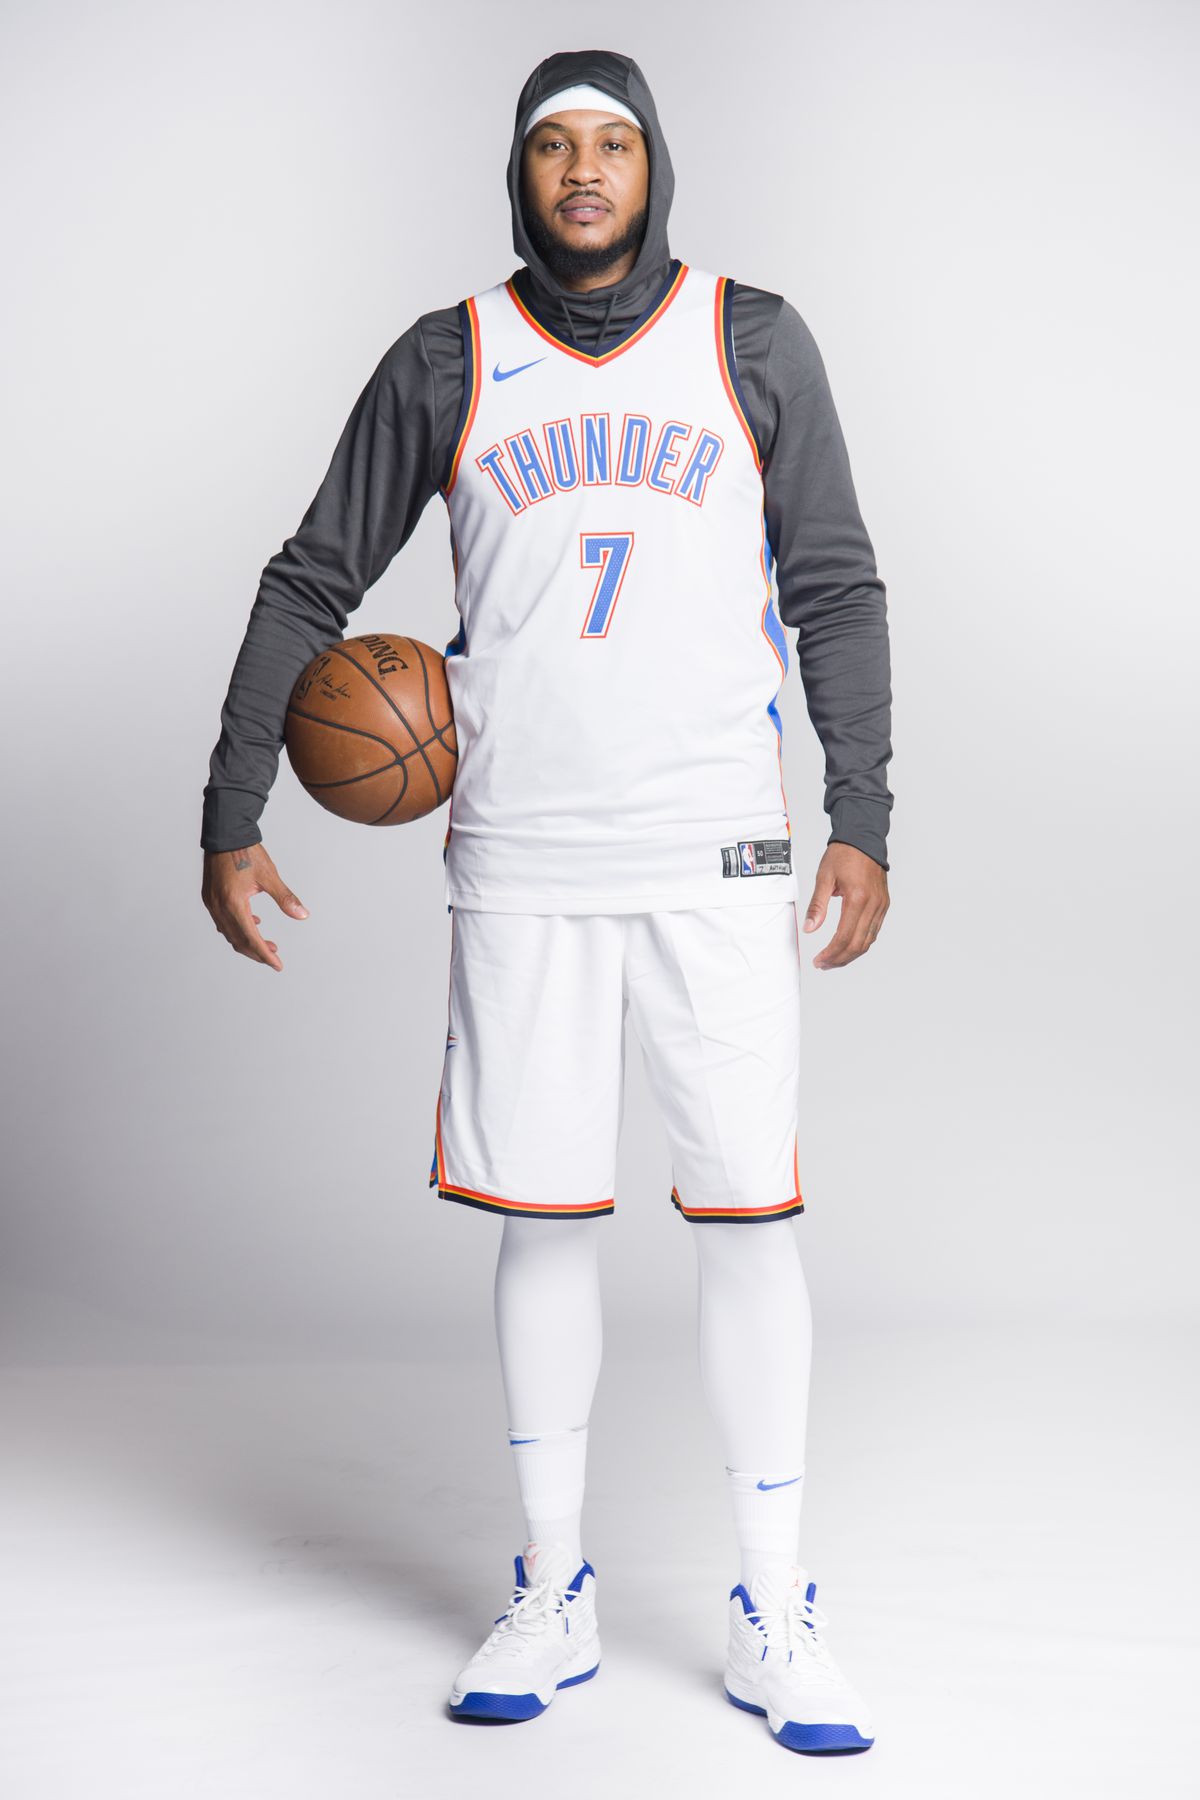 Melo images